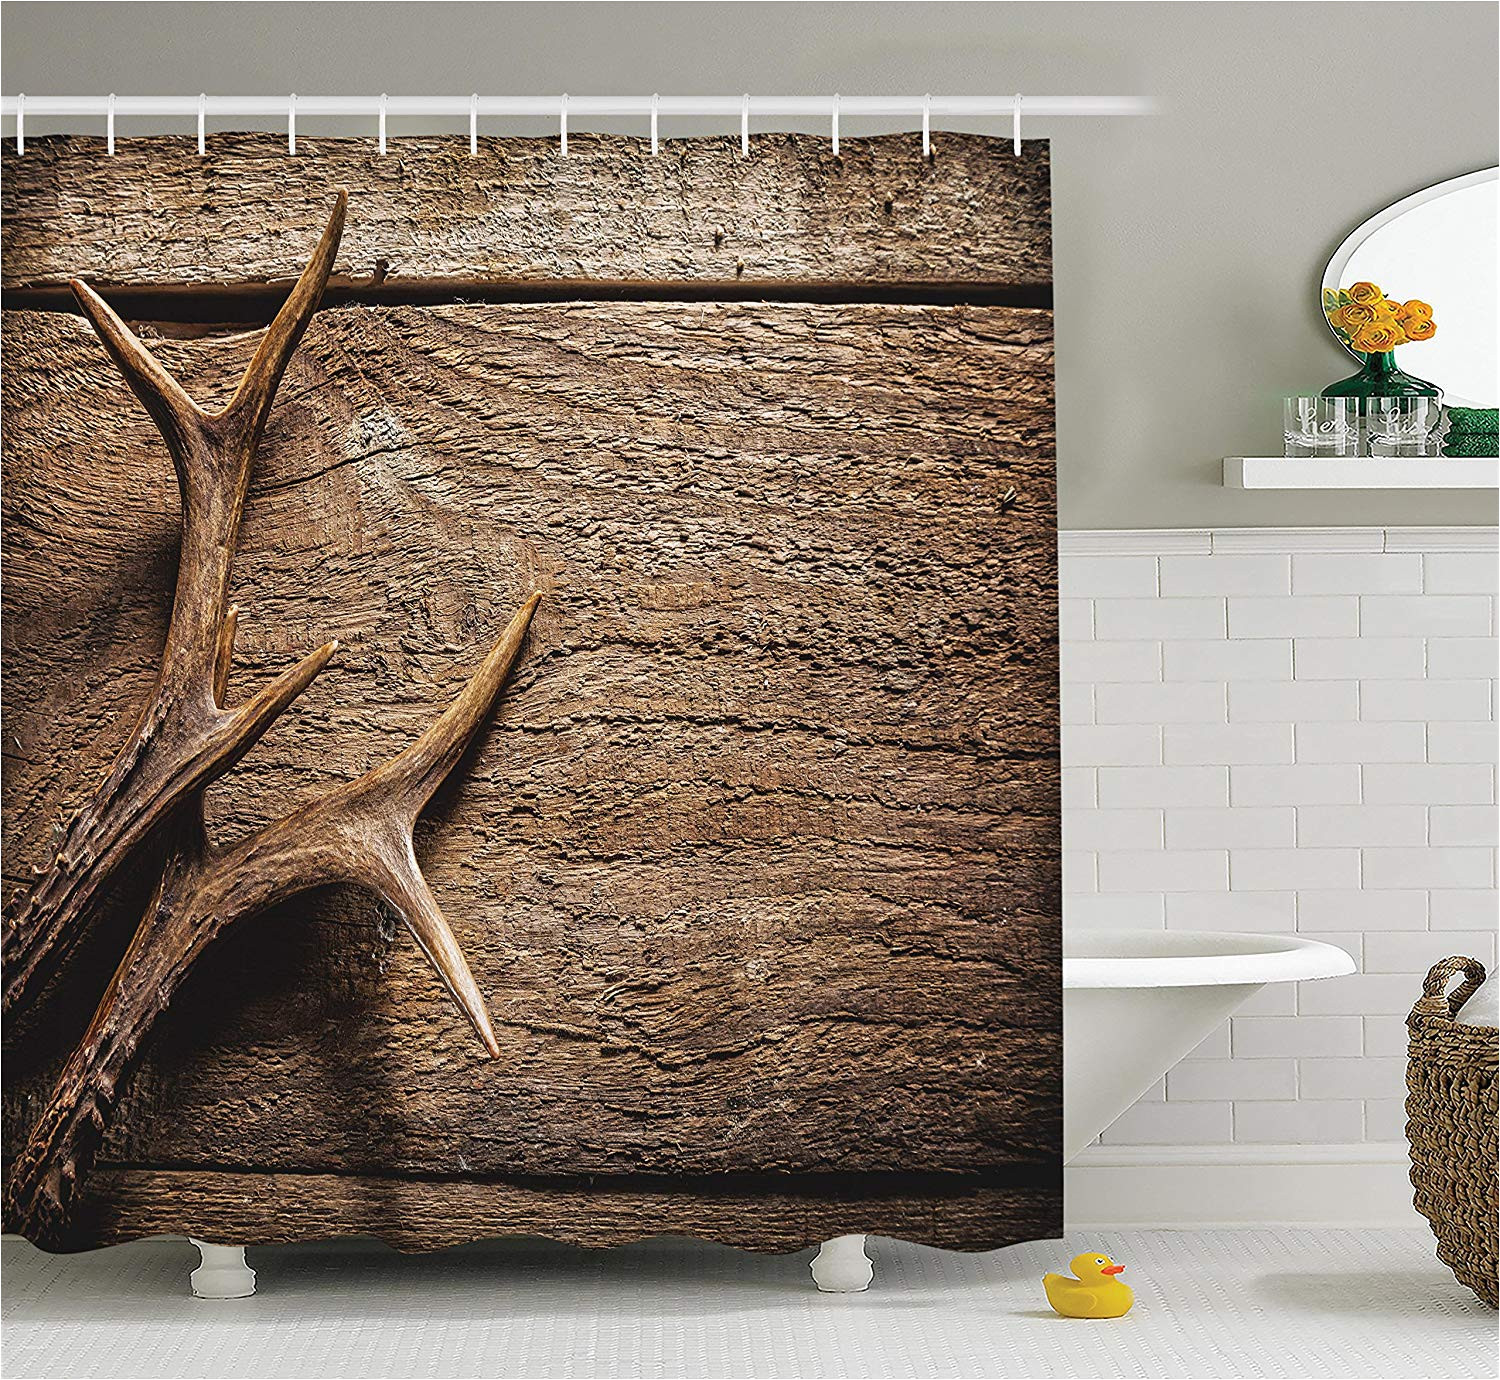 amazon com ambesonne antlers decor shower curtain set deer antlers on wood table rustic texture surface hunting season decorating bathroom accessories